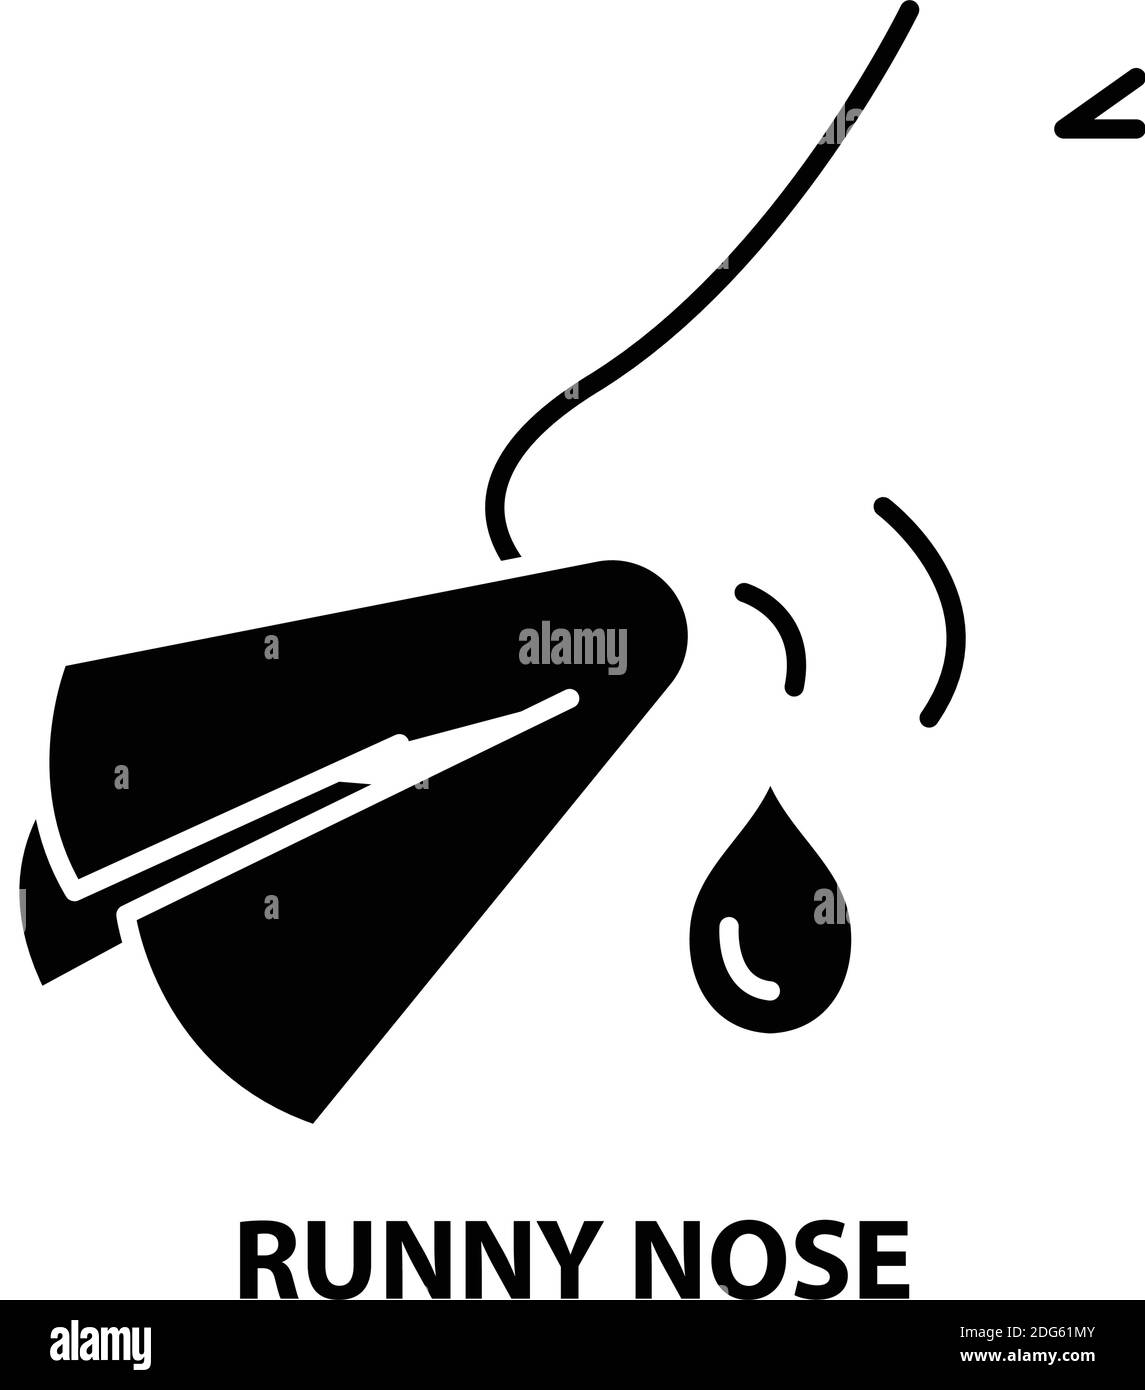 runny nose icon, black vector sign with editable strokes, concept illustration Stock Vector